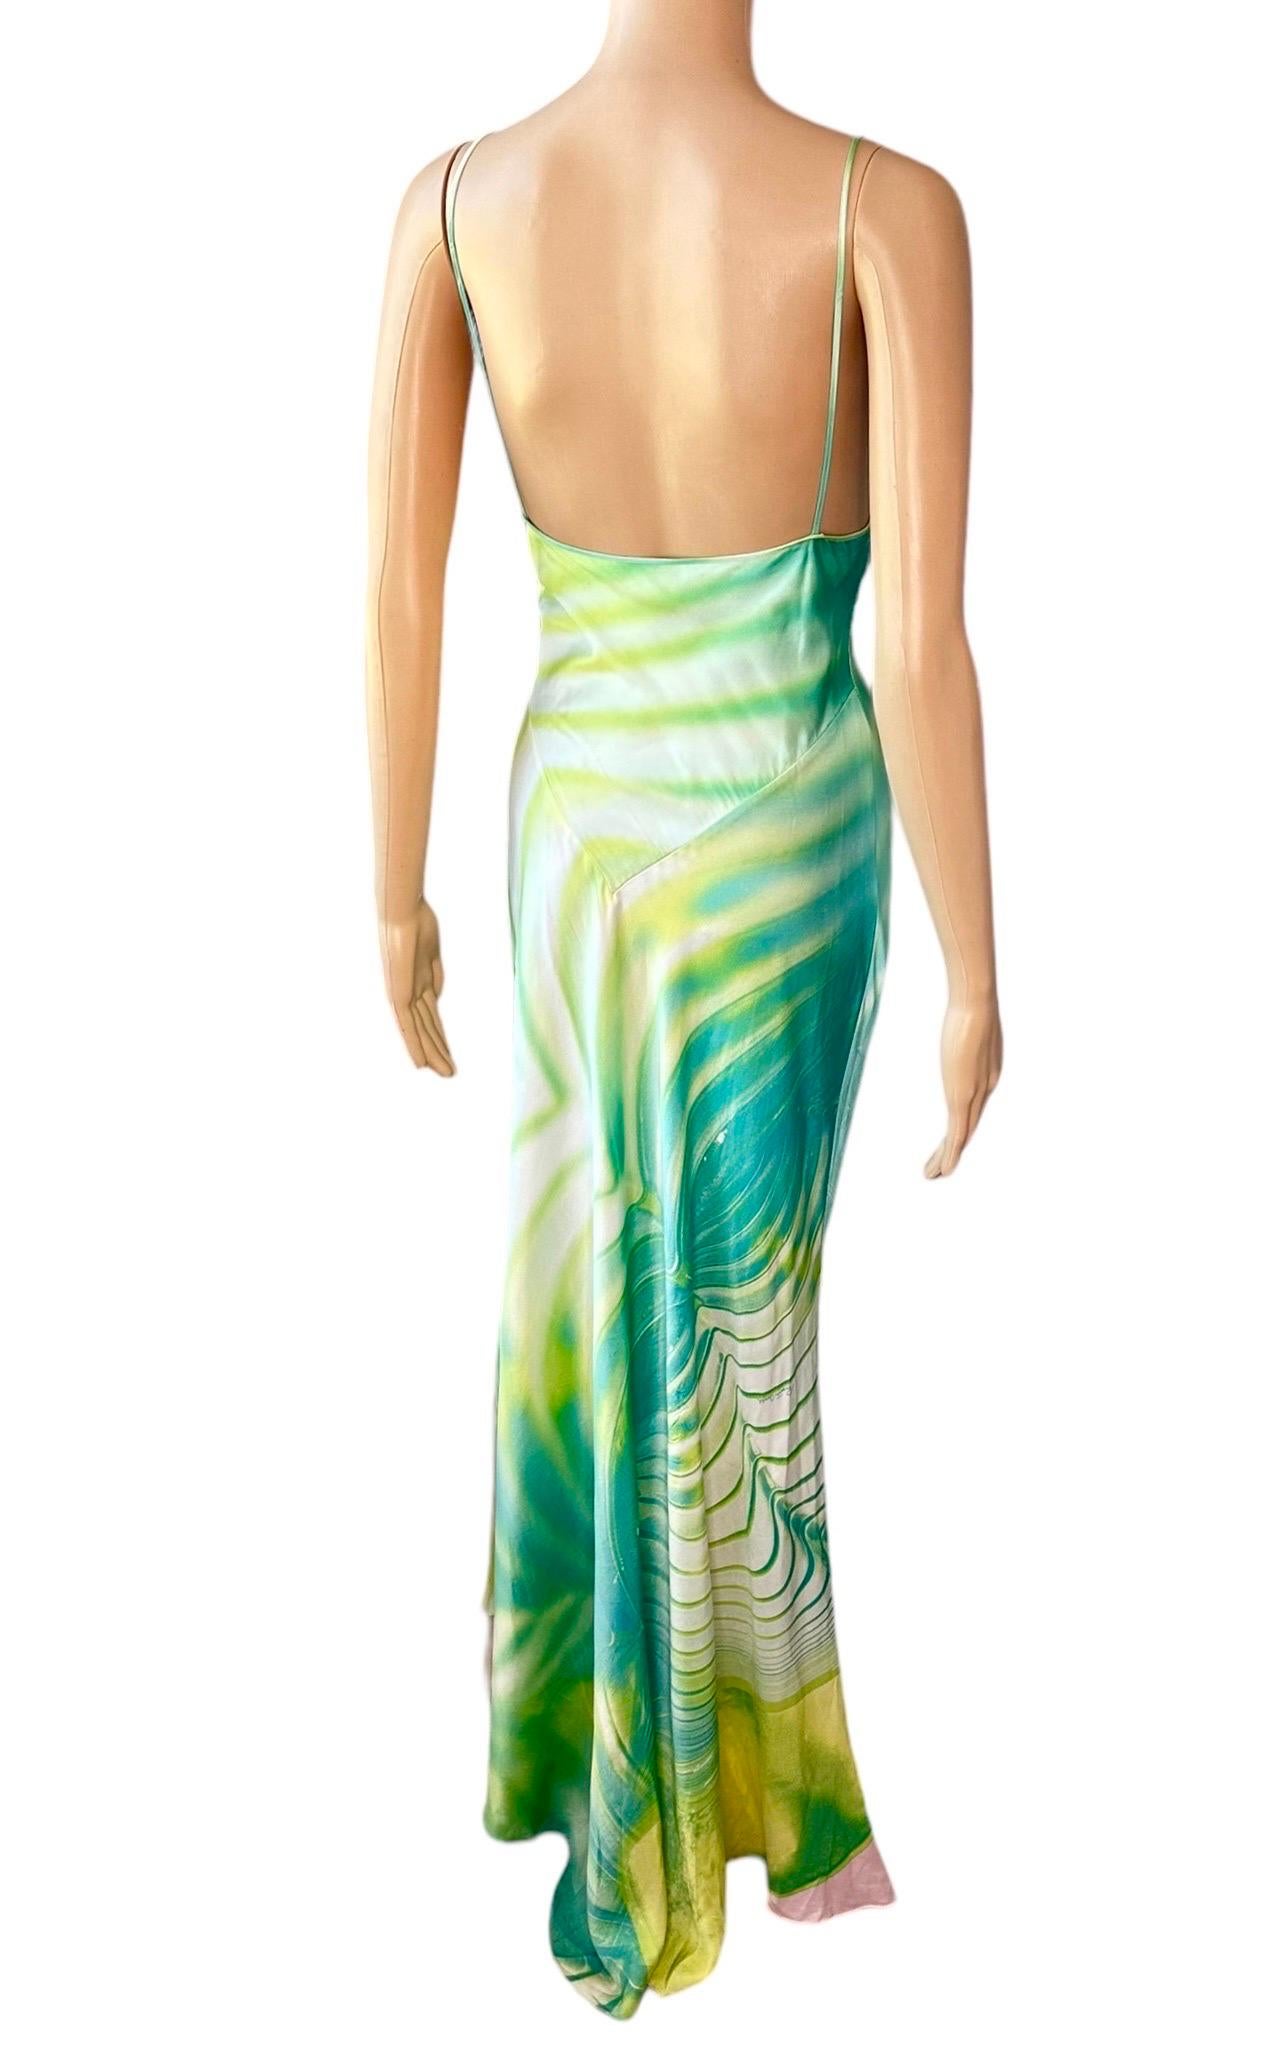 Roberto Cavalli S/S 2001 Psychedelic Print Silk Slip Maxi Evening Dress Gown For Sale 5